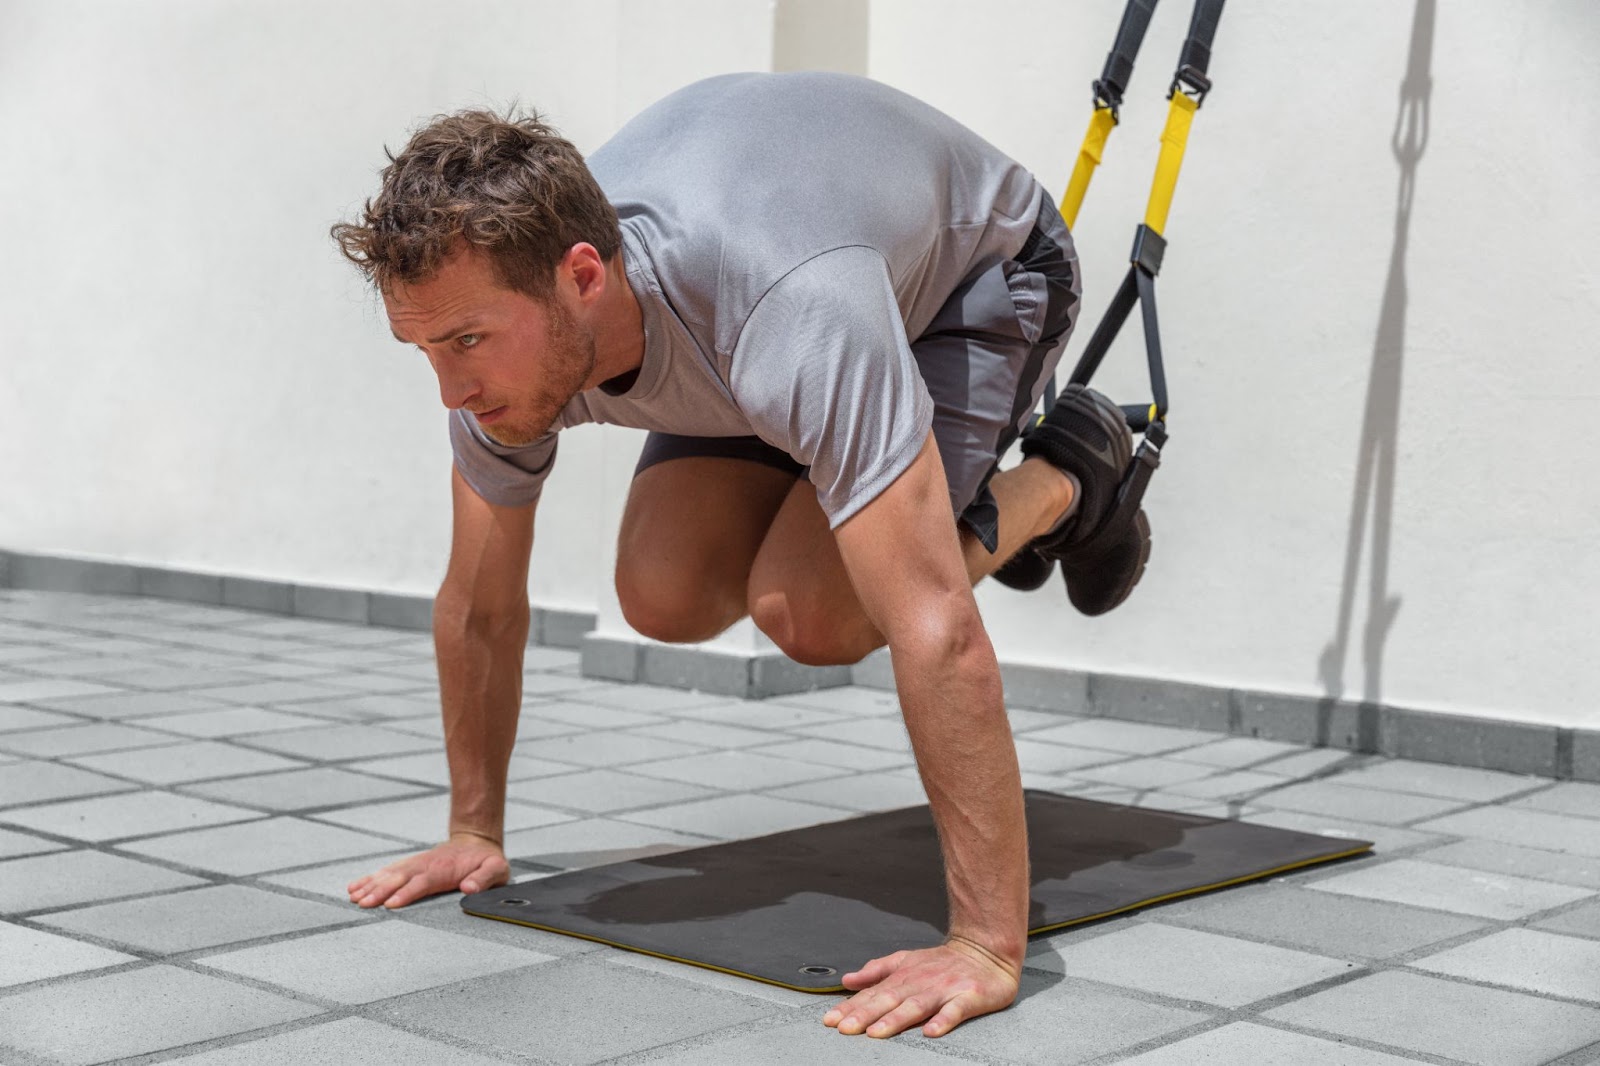 Man doing TRX exercises at a gym